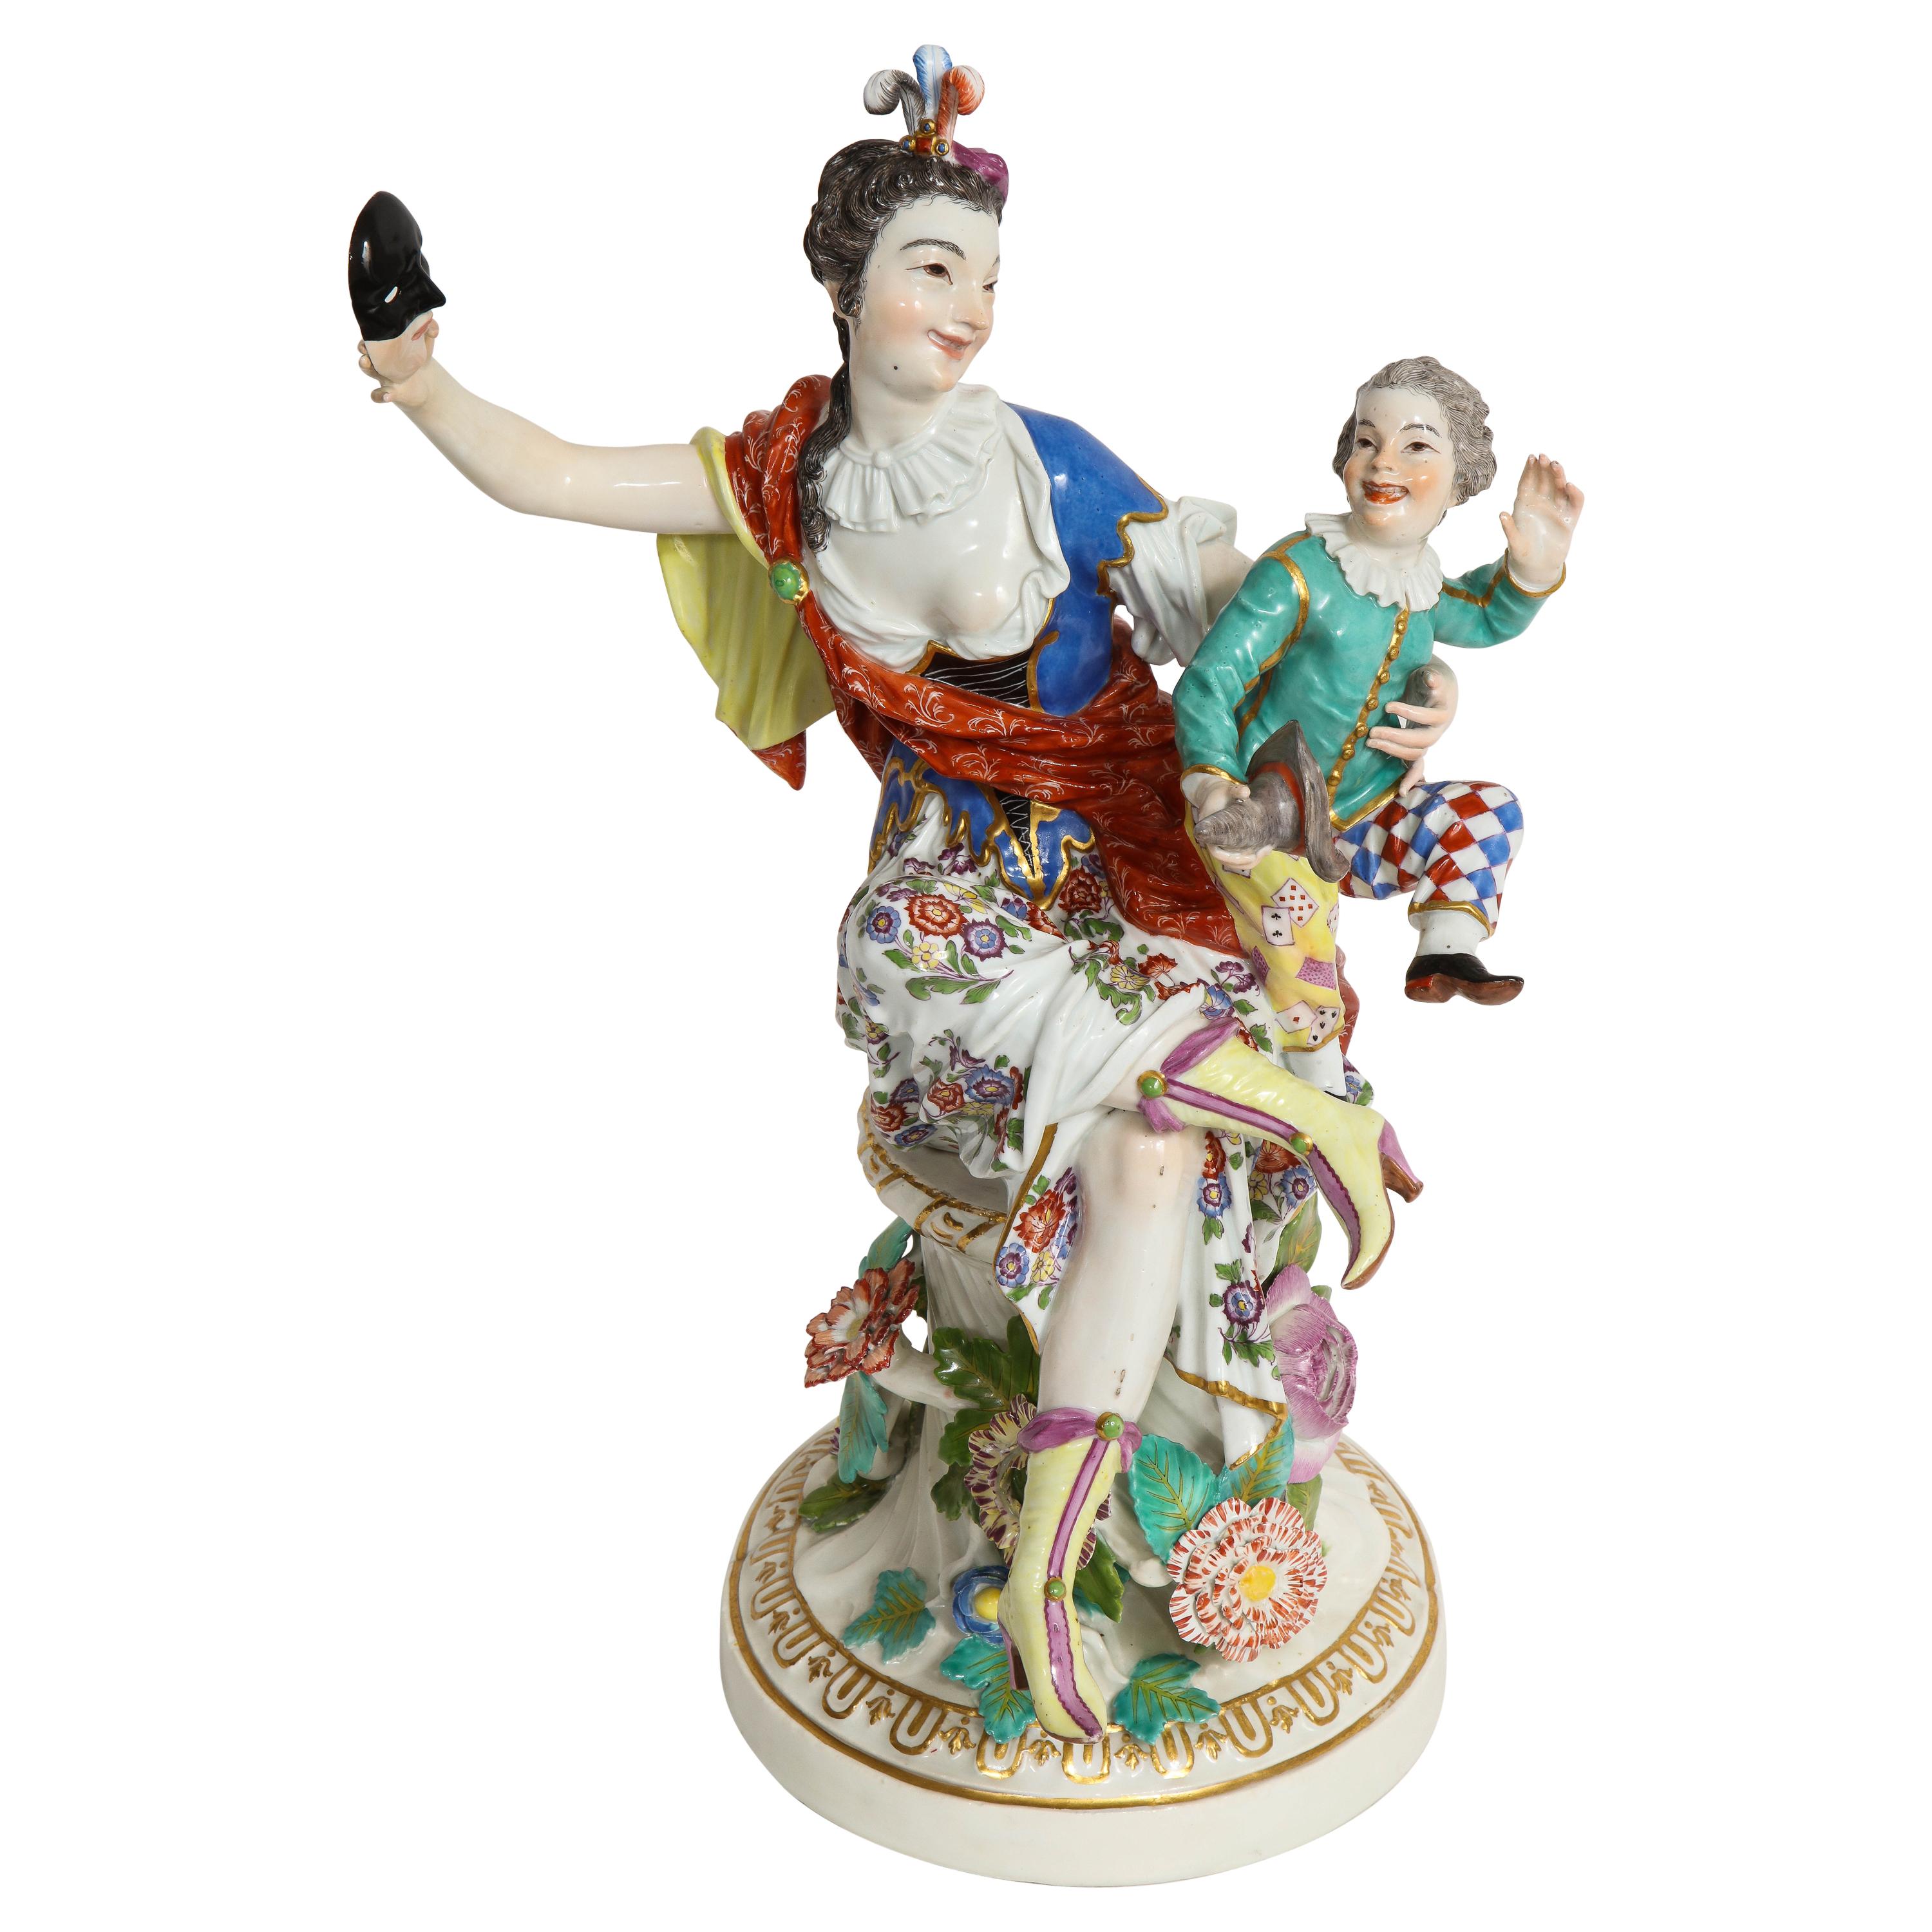 Rare 18th Century Meissen Porcelain Group of a Thalia with a Harlequin Child